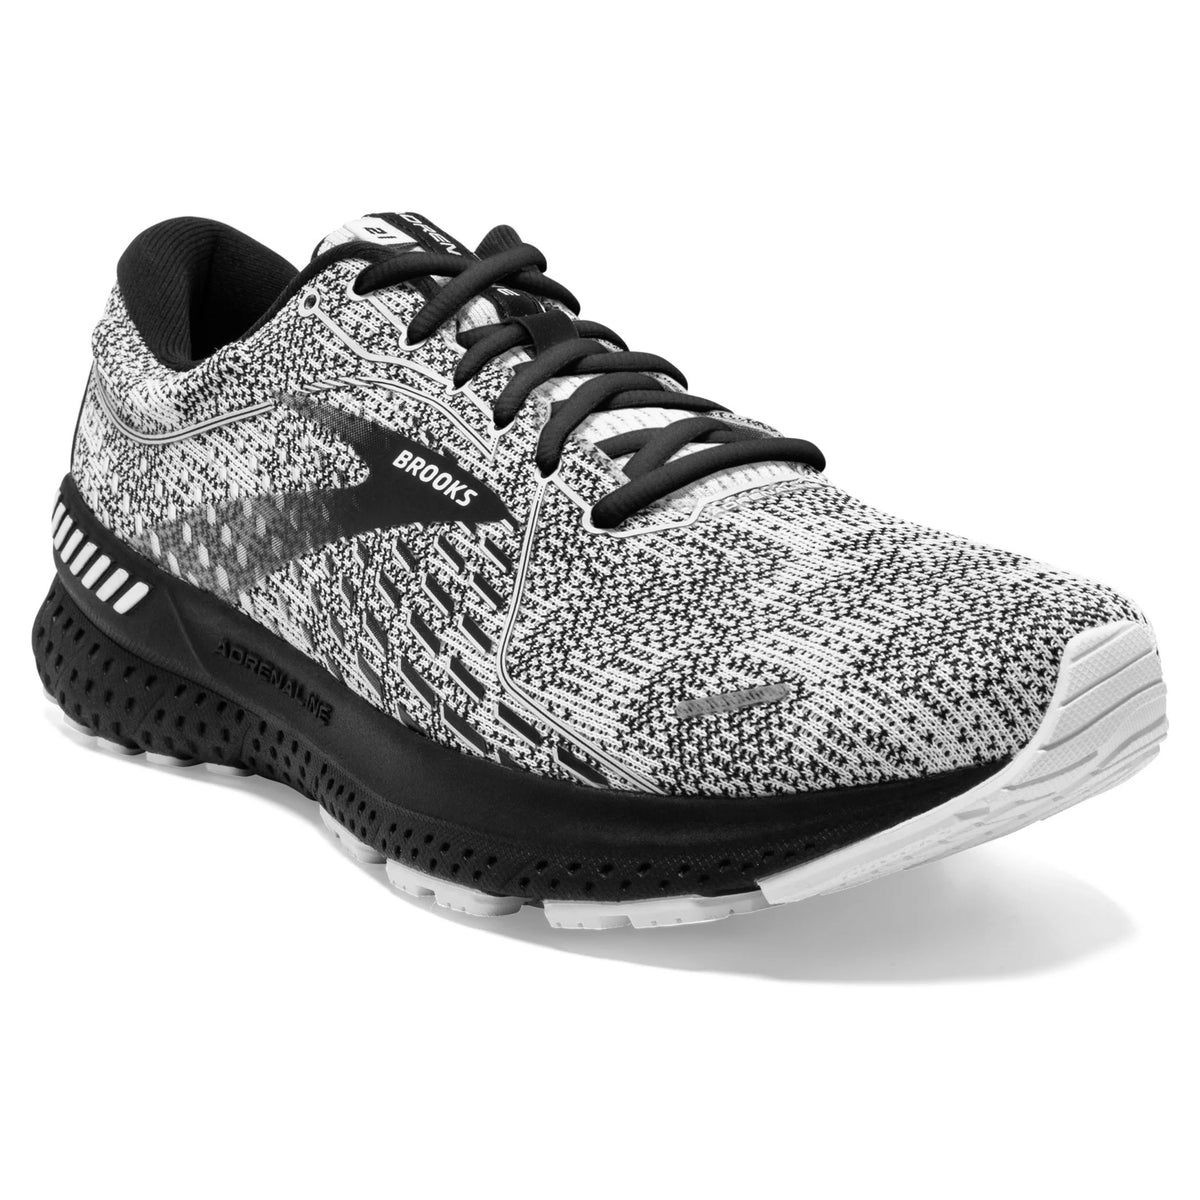 Sentence with replaced product name and brand: Brooks Adrenaline GTS 21 Blackened White/Grey - Mens, a black and white patterned stability running shoe on a white background.